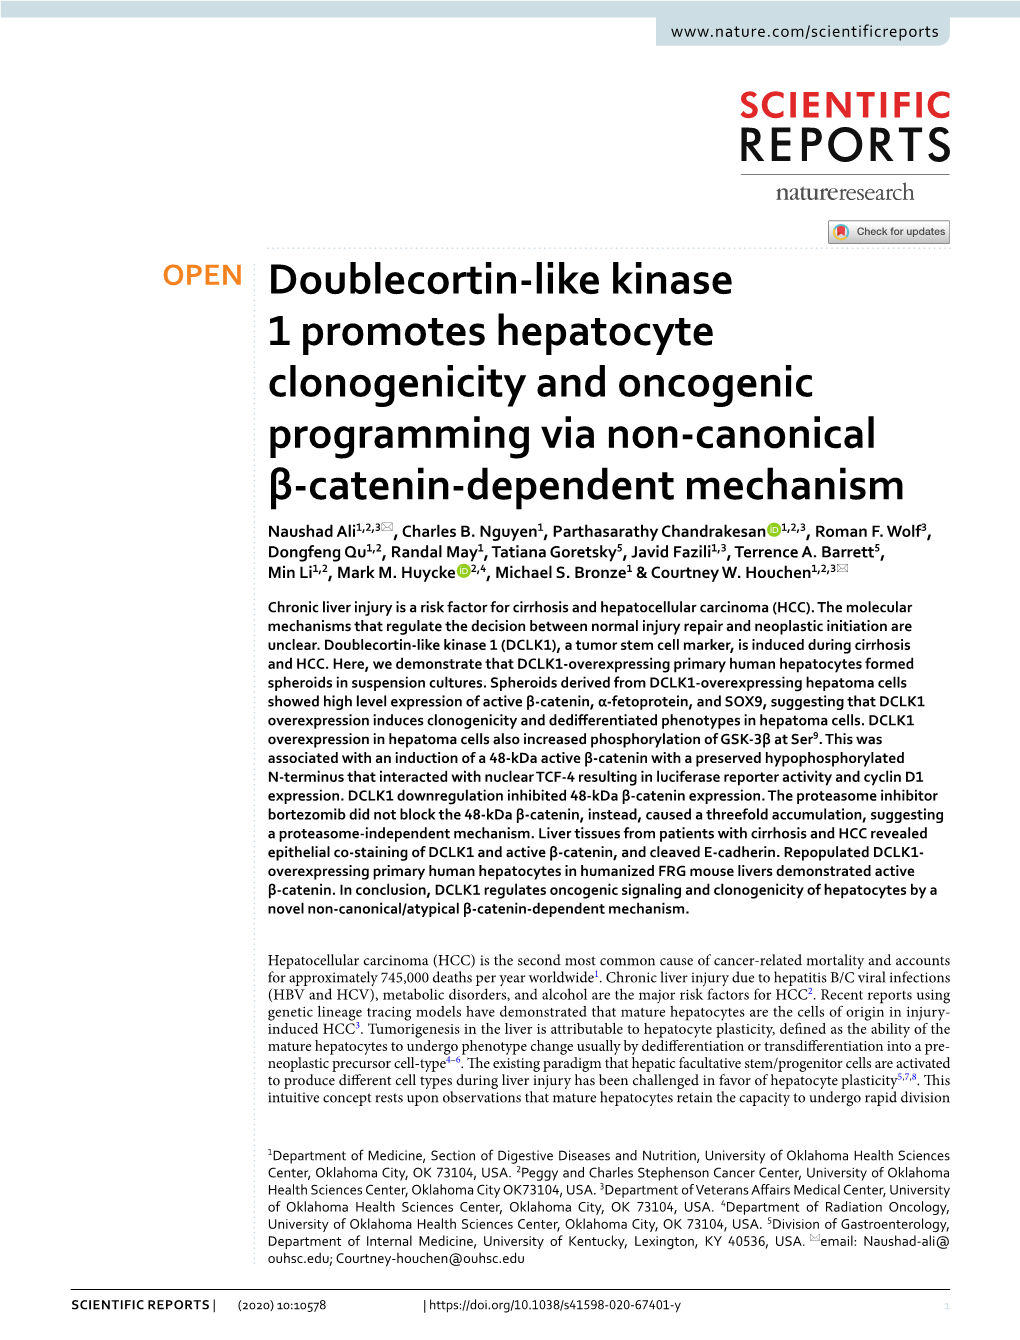 Doublecortin-Like Kinase 1 Promotes Hepatocyte Clonogenicity and Oncogenic Programming Via Non-Canonical Β-Catenin-Dependent Me